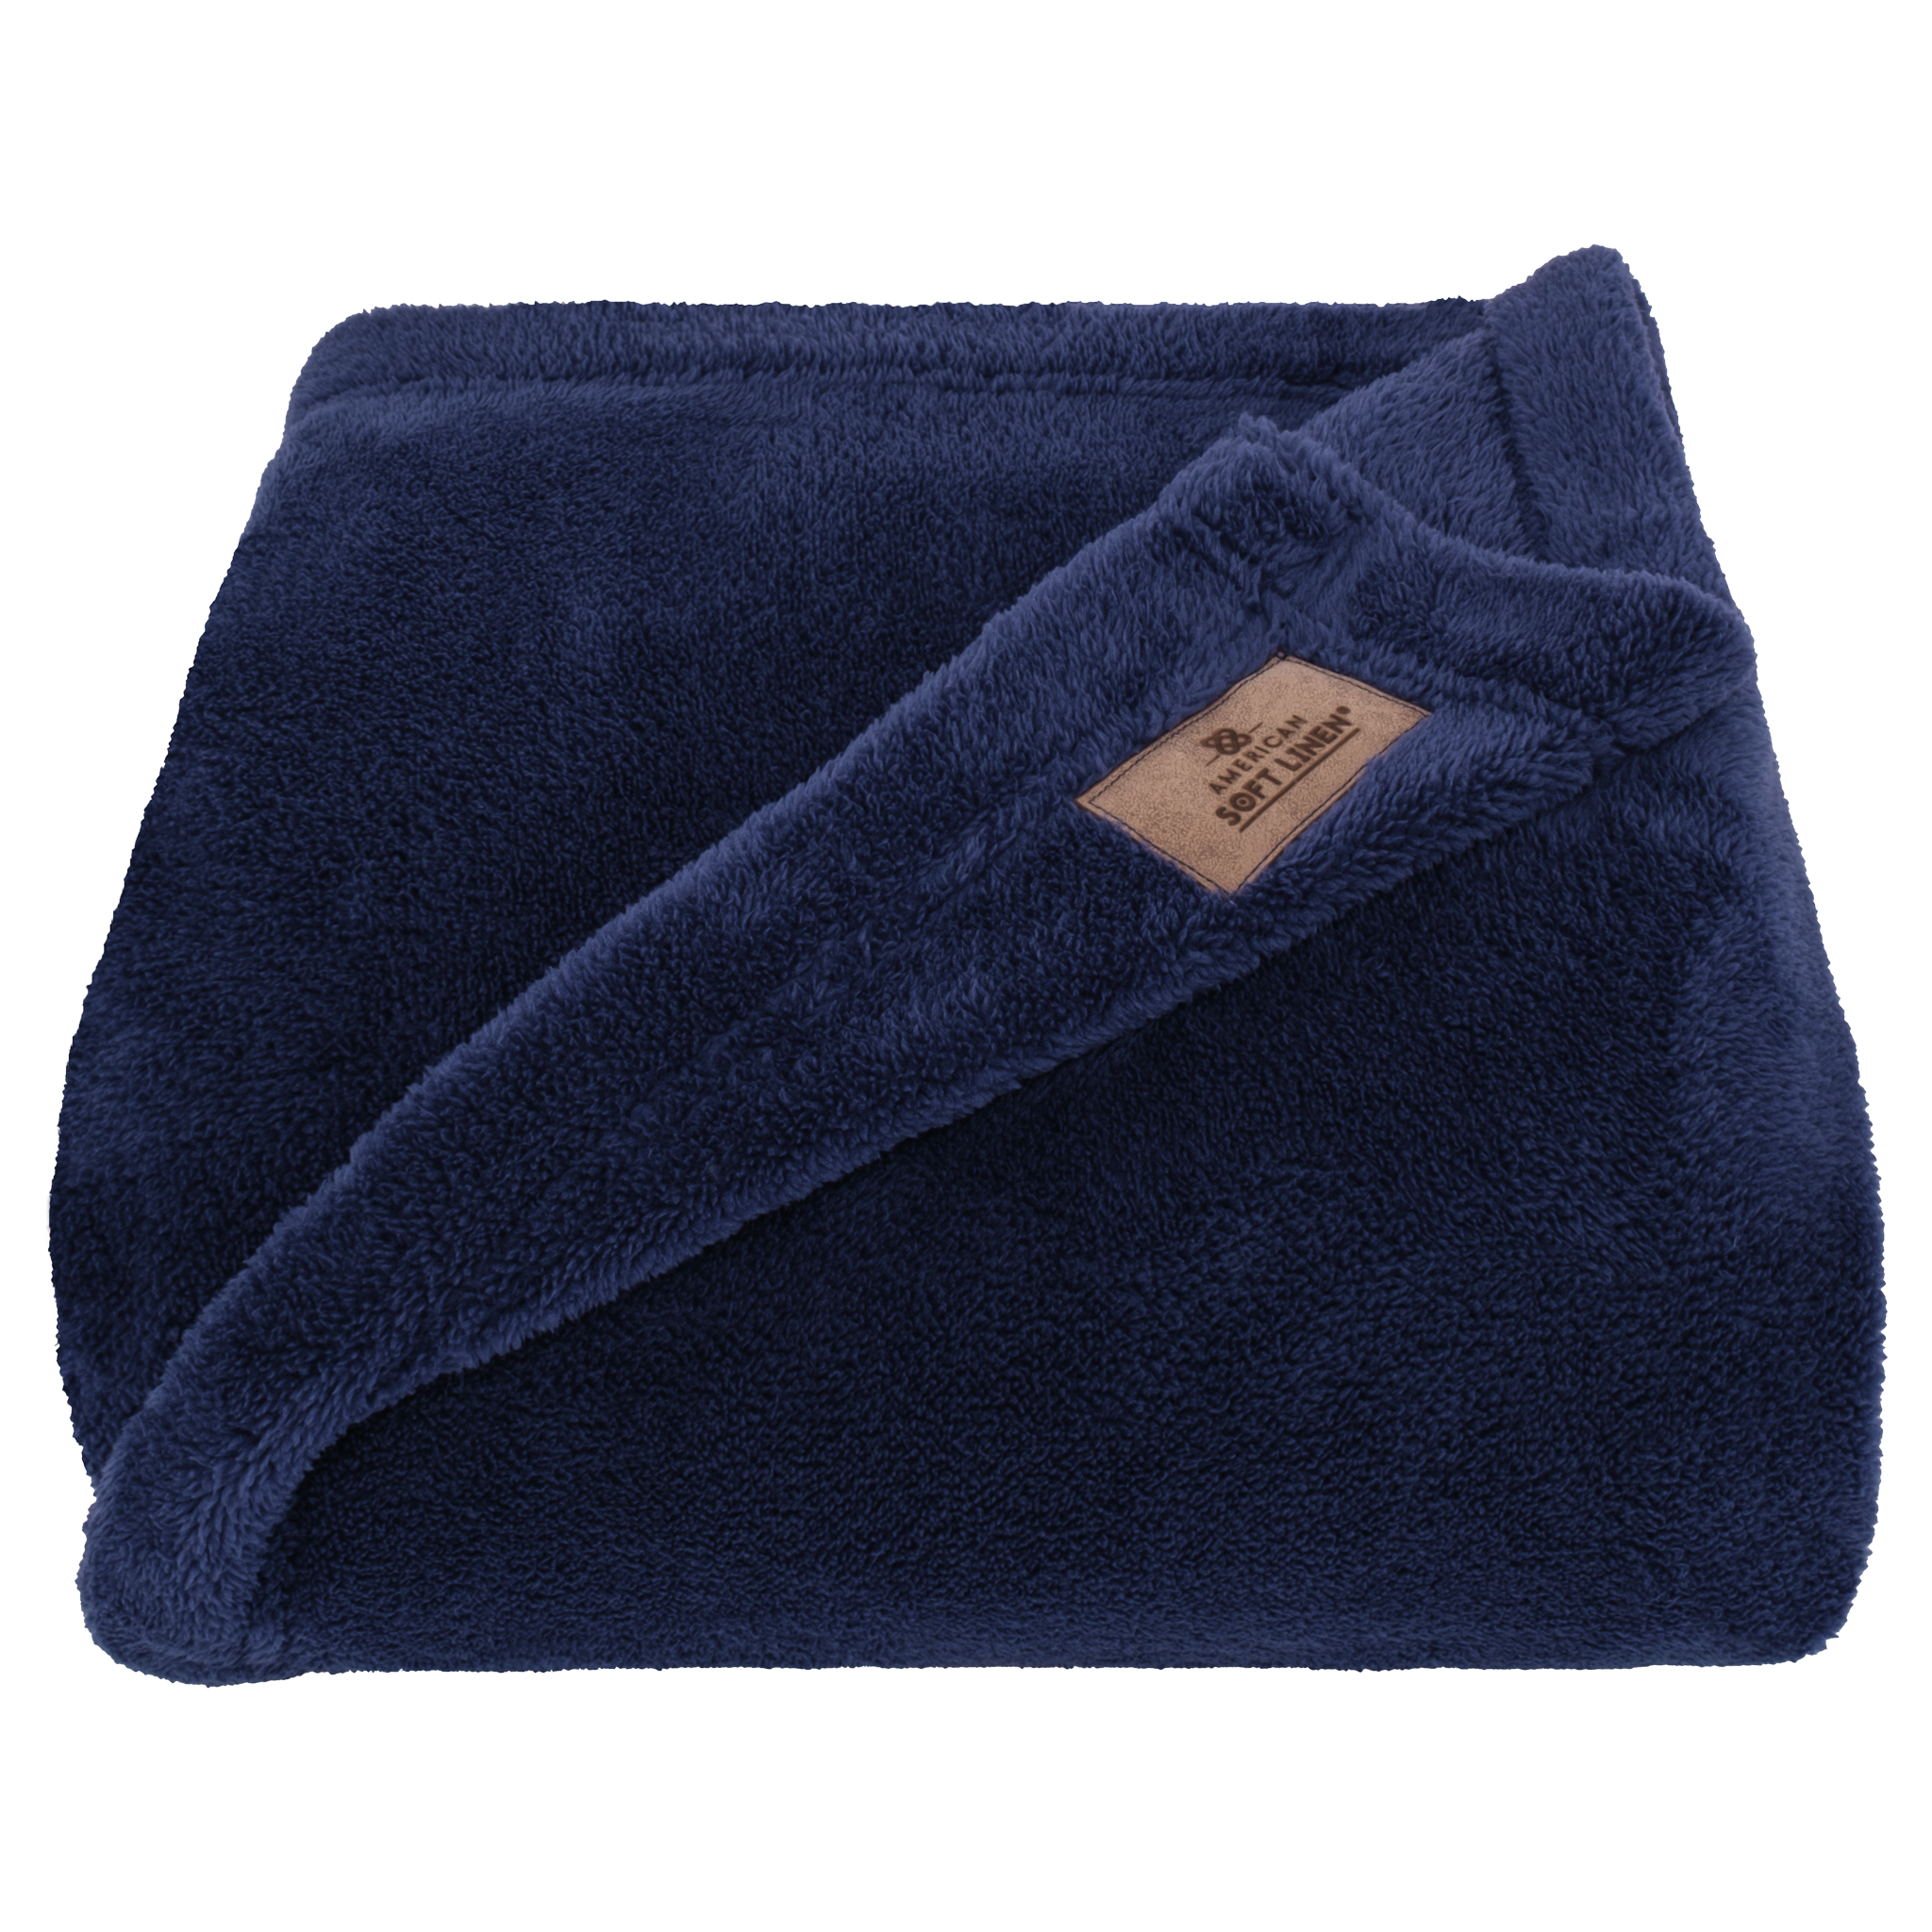 American Soft Linen - Bedding Fleece Blanket - Wholesale - 15 Set Case Pack - Twin Size 60x80 inches - Navy-Blue - 3